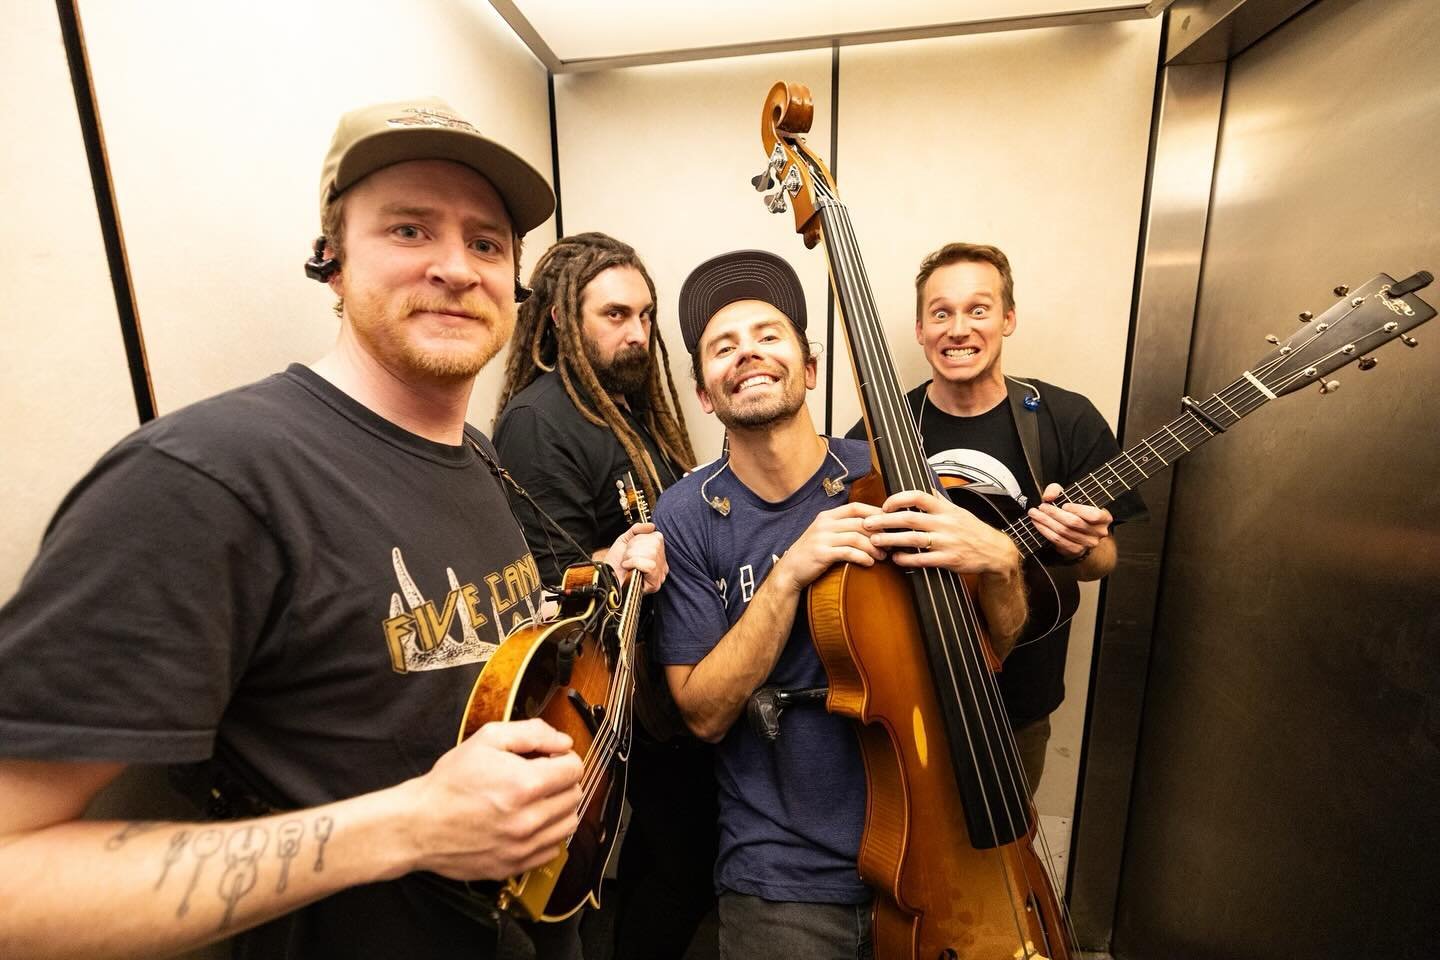 Just a couple of dudes happy to be playing bluegrass 😀 Tickets are on sale now for our end-of-summer parties in Jackson, WY and Three Forks, MT. Go get em&rsquo; and join in on the fun 🎉

🎟️ &rarr; Link in bio / story 

📸: @onthedlphoto